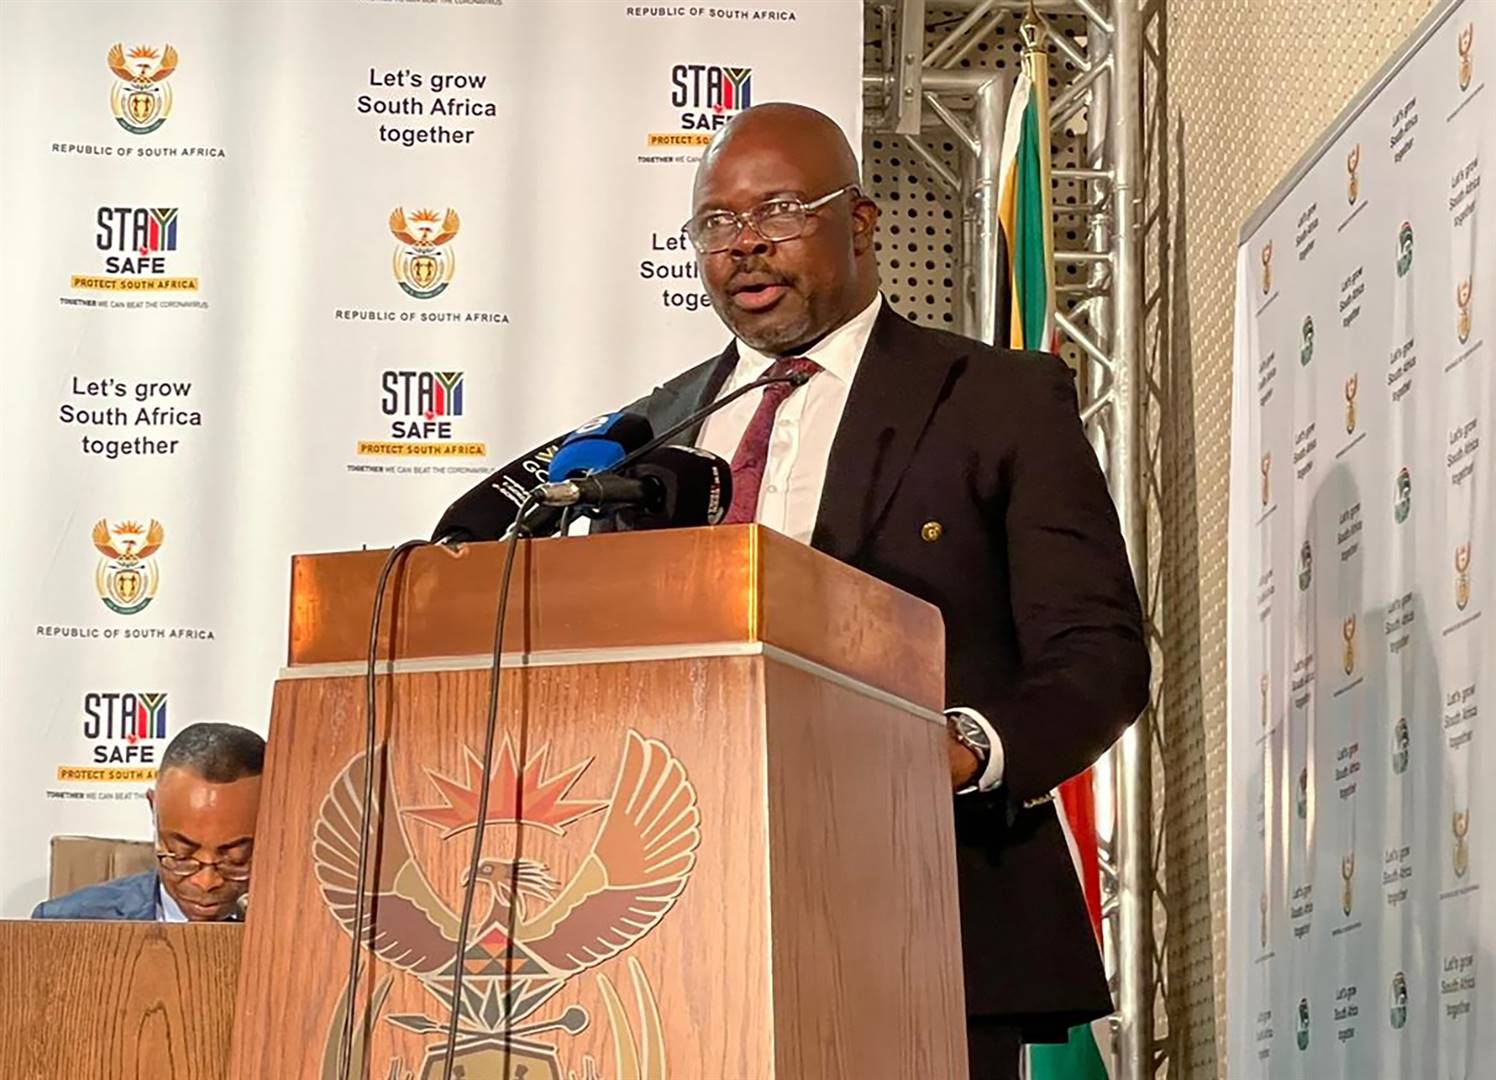 Nsfas board chairperson Ernest Khosa during the media briefing. Photo by Kgalalelo Tlhoaele